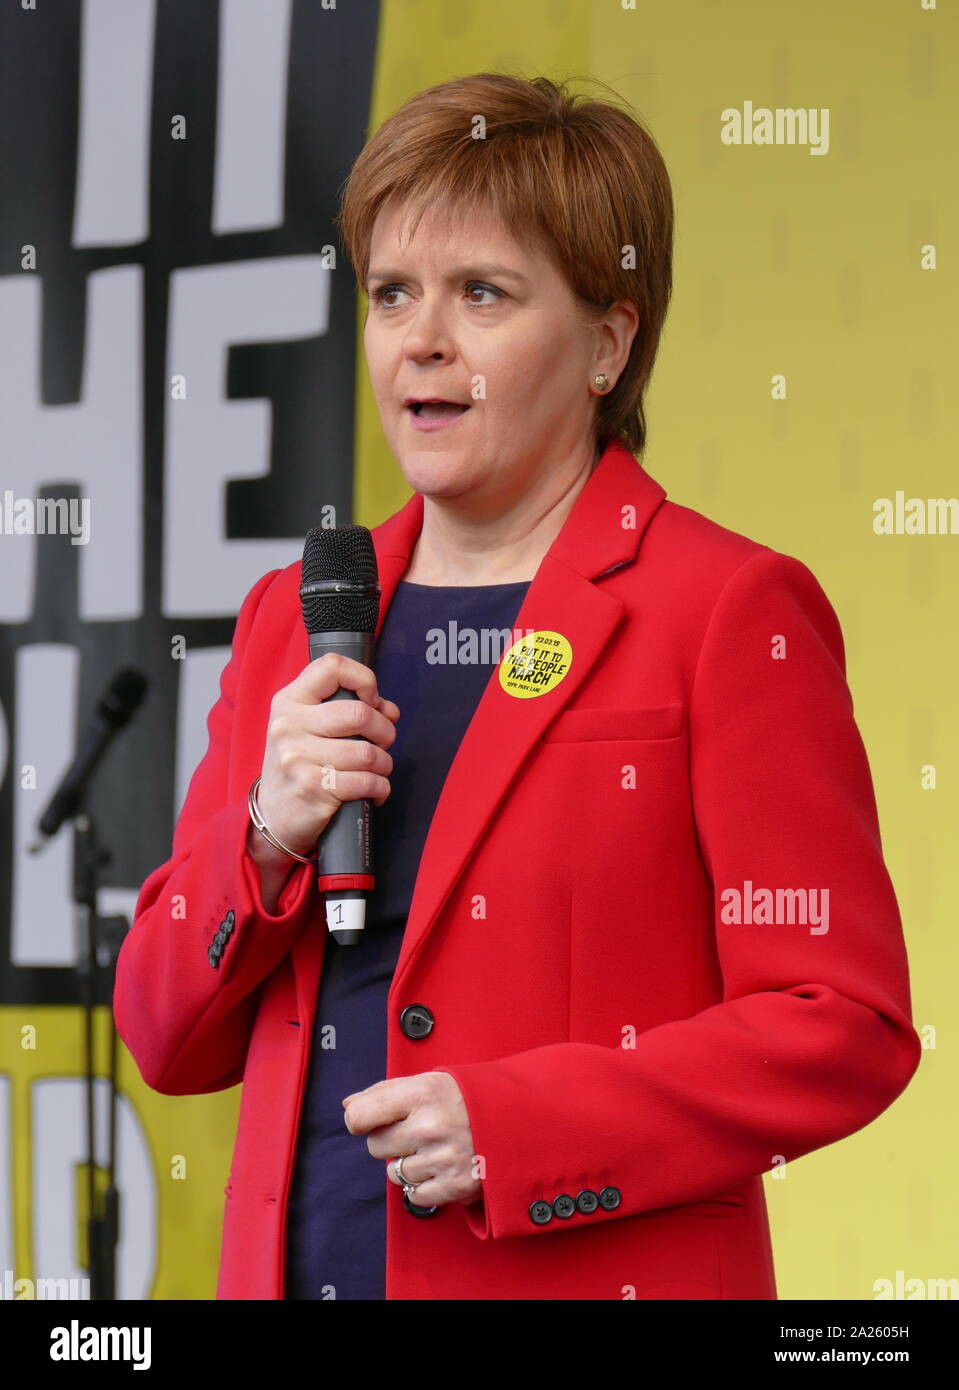 Nicola Ferguson Sturgeon, First Minister of Scotland addresses the 'People's Vote' march in Parliament Square, London. The People's Vote march took place in London on 23 March 2019 as part of a series of demonstrations to protest against Brexit, call for a new referendum, and ask the British Government to revoke Article 50. It brought to the capital hundreds of thousands of protestors, or over a million people according to the organizers. Stock Photo